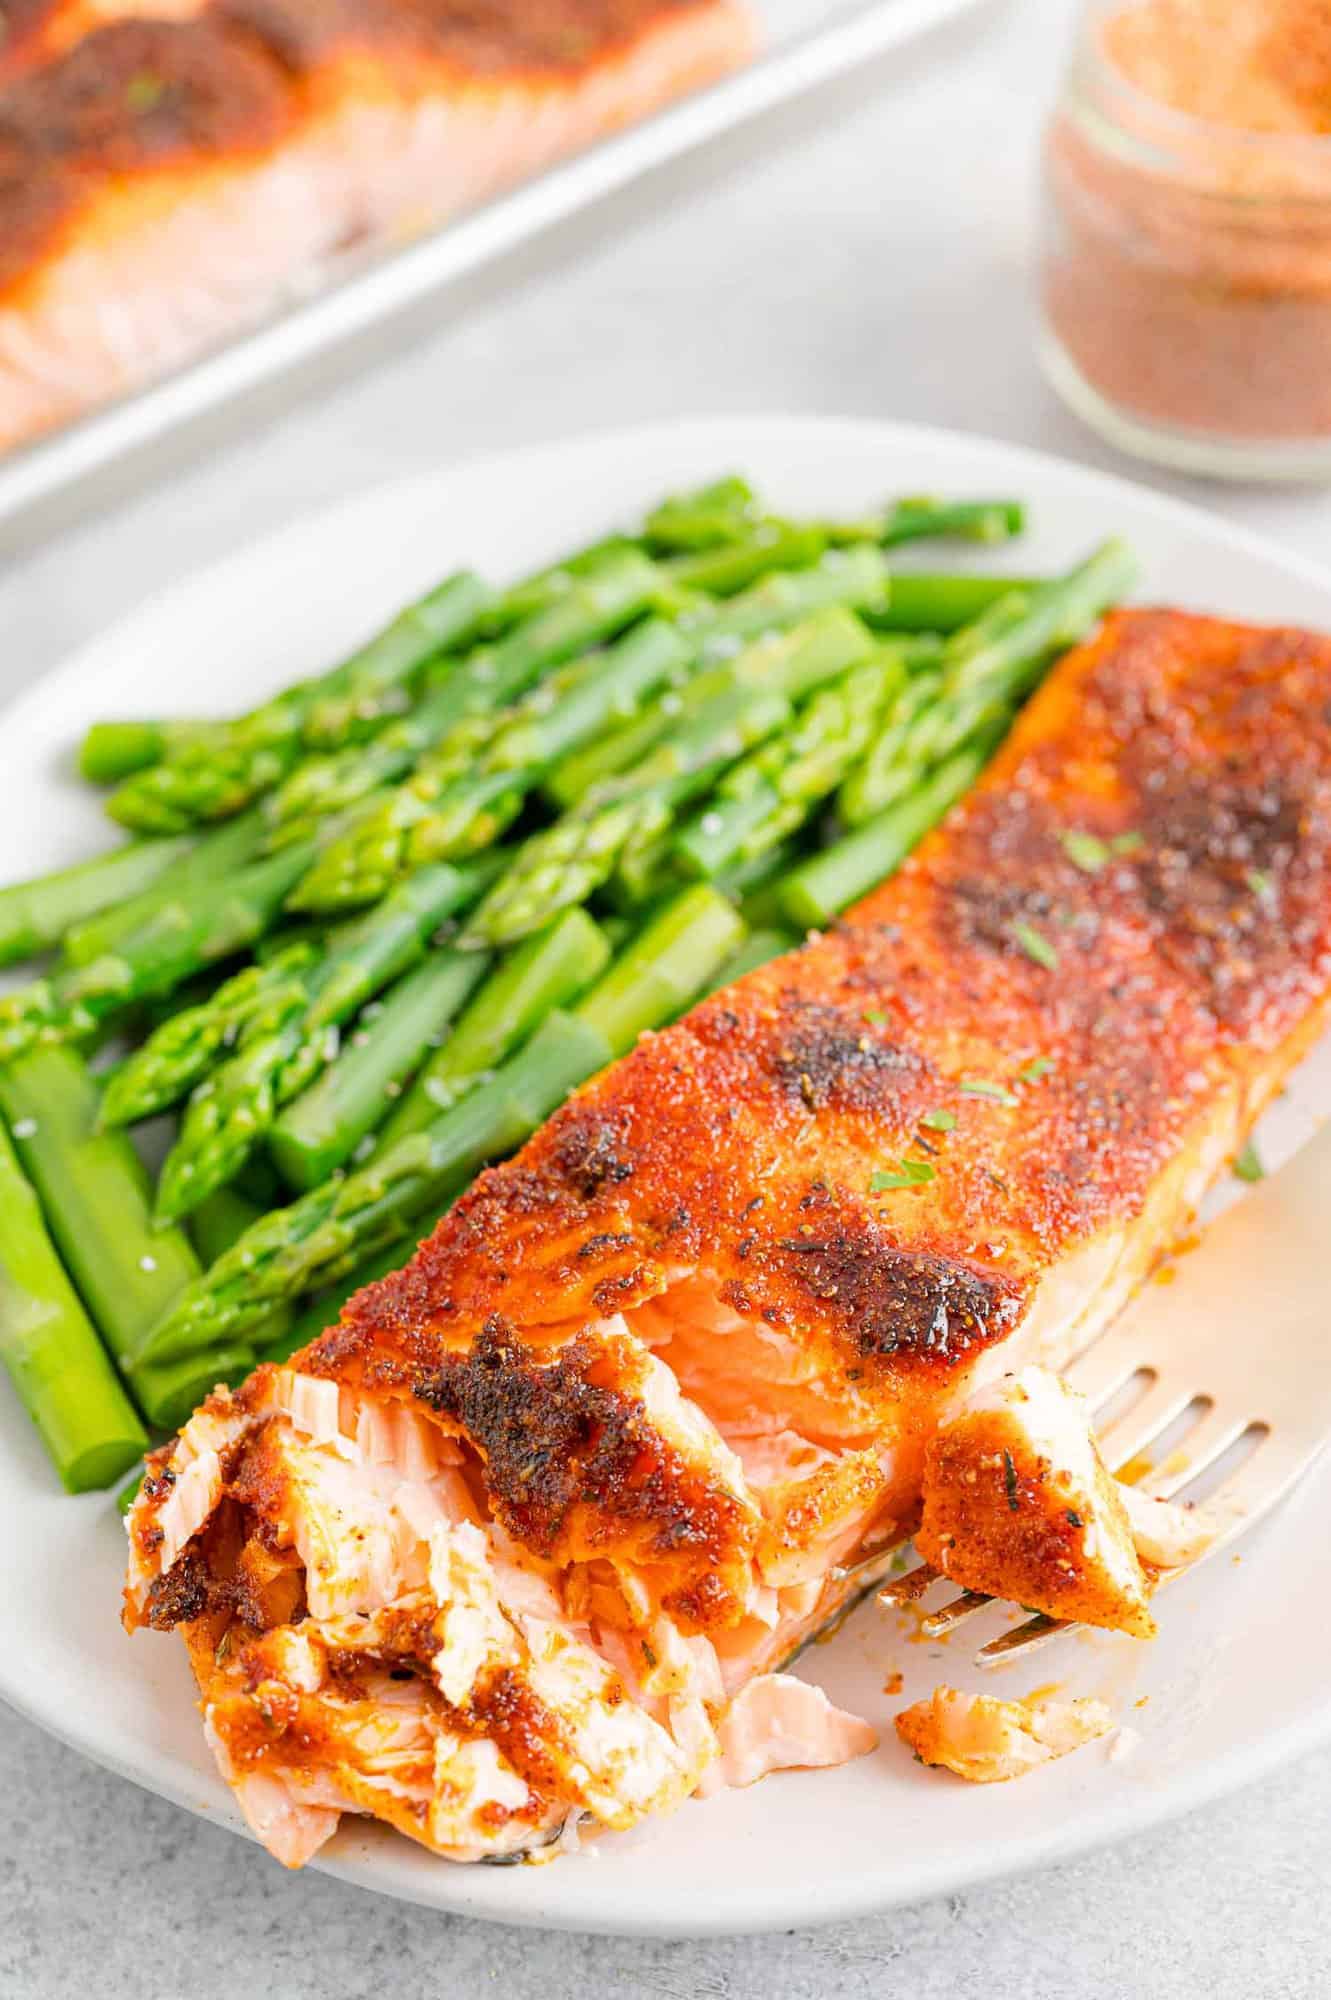 A broiled salmon filet with the corner partially flaked, next to a side of green beans on a white plate.